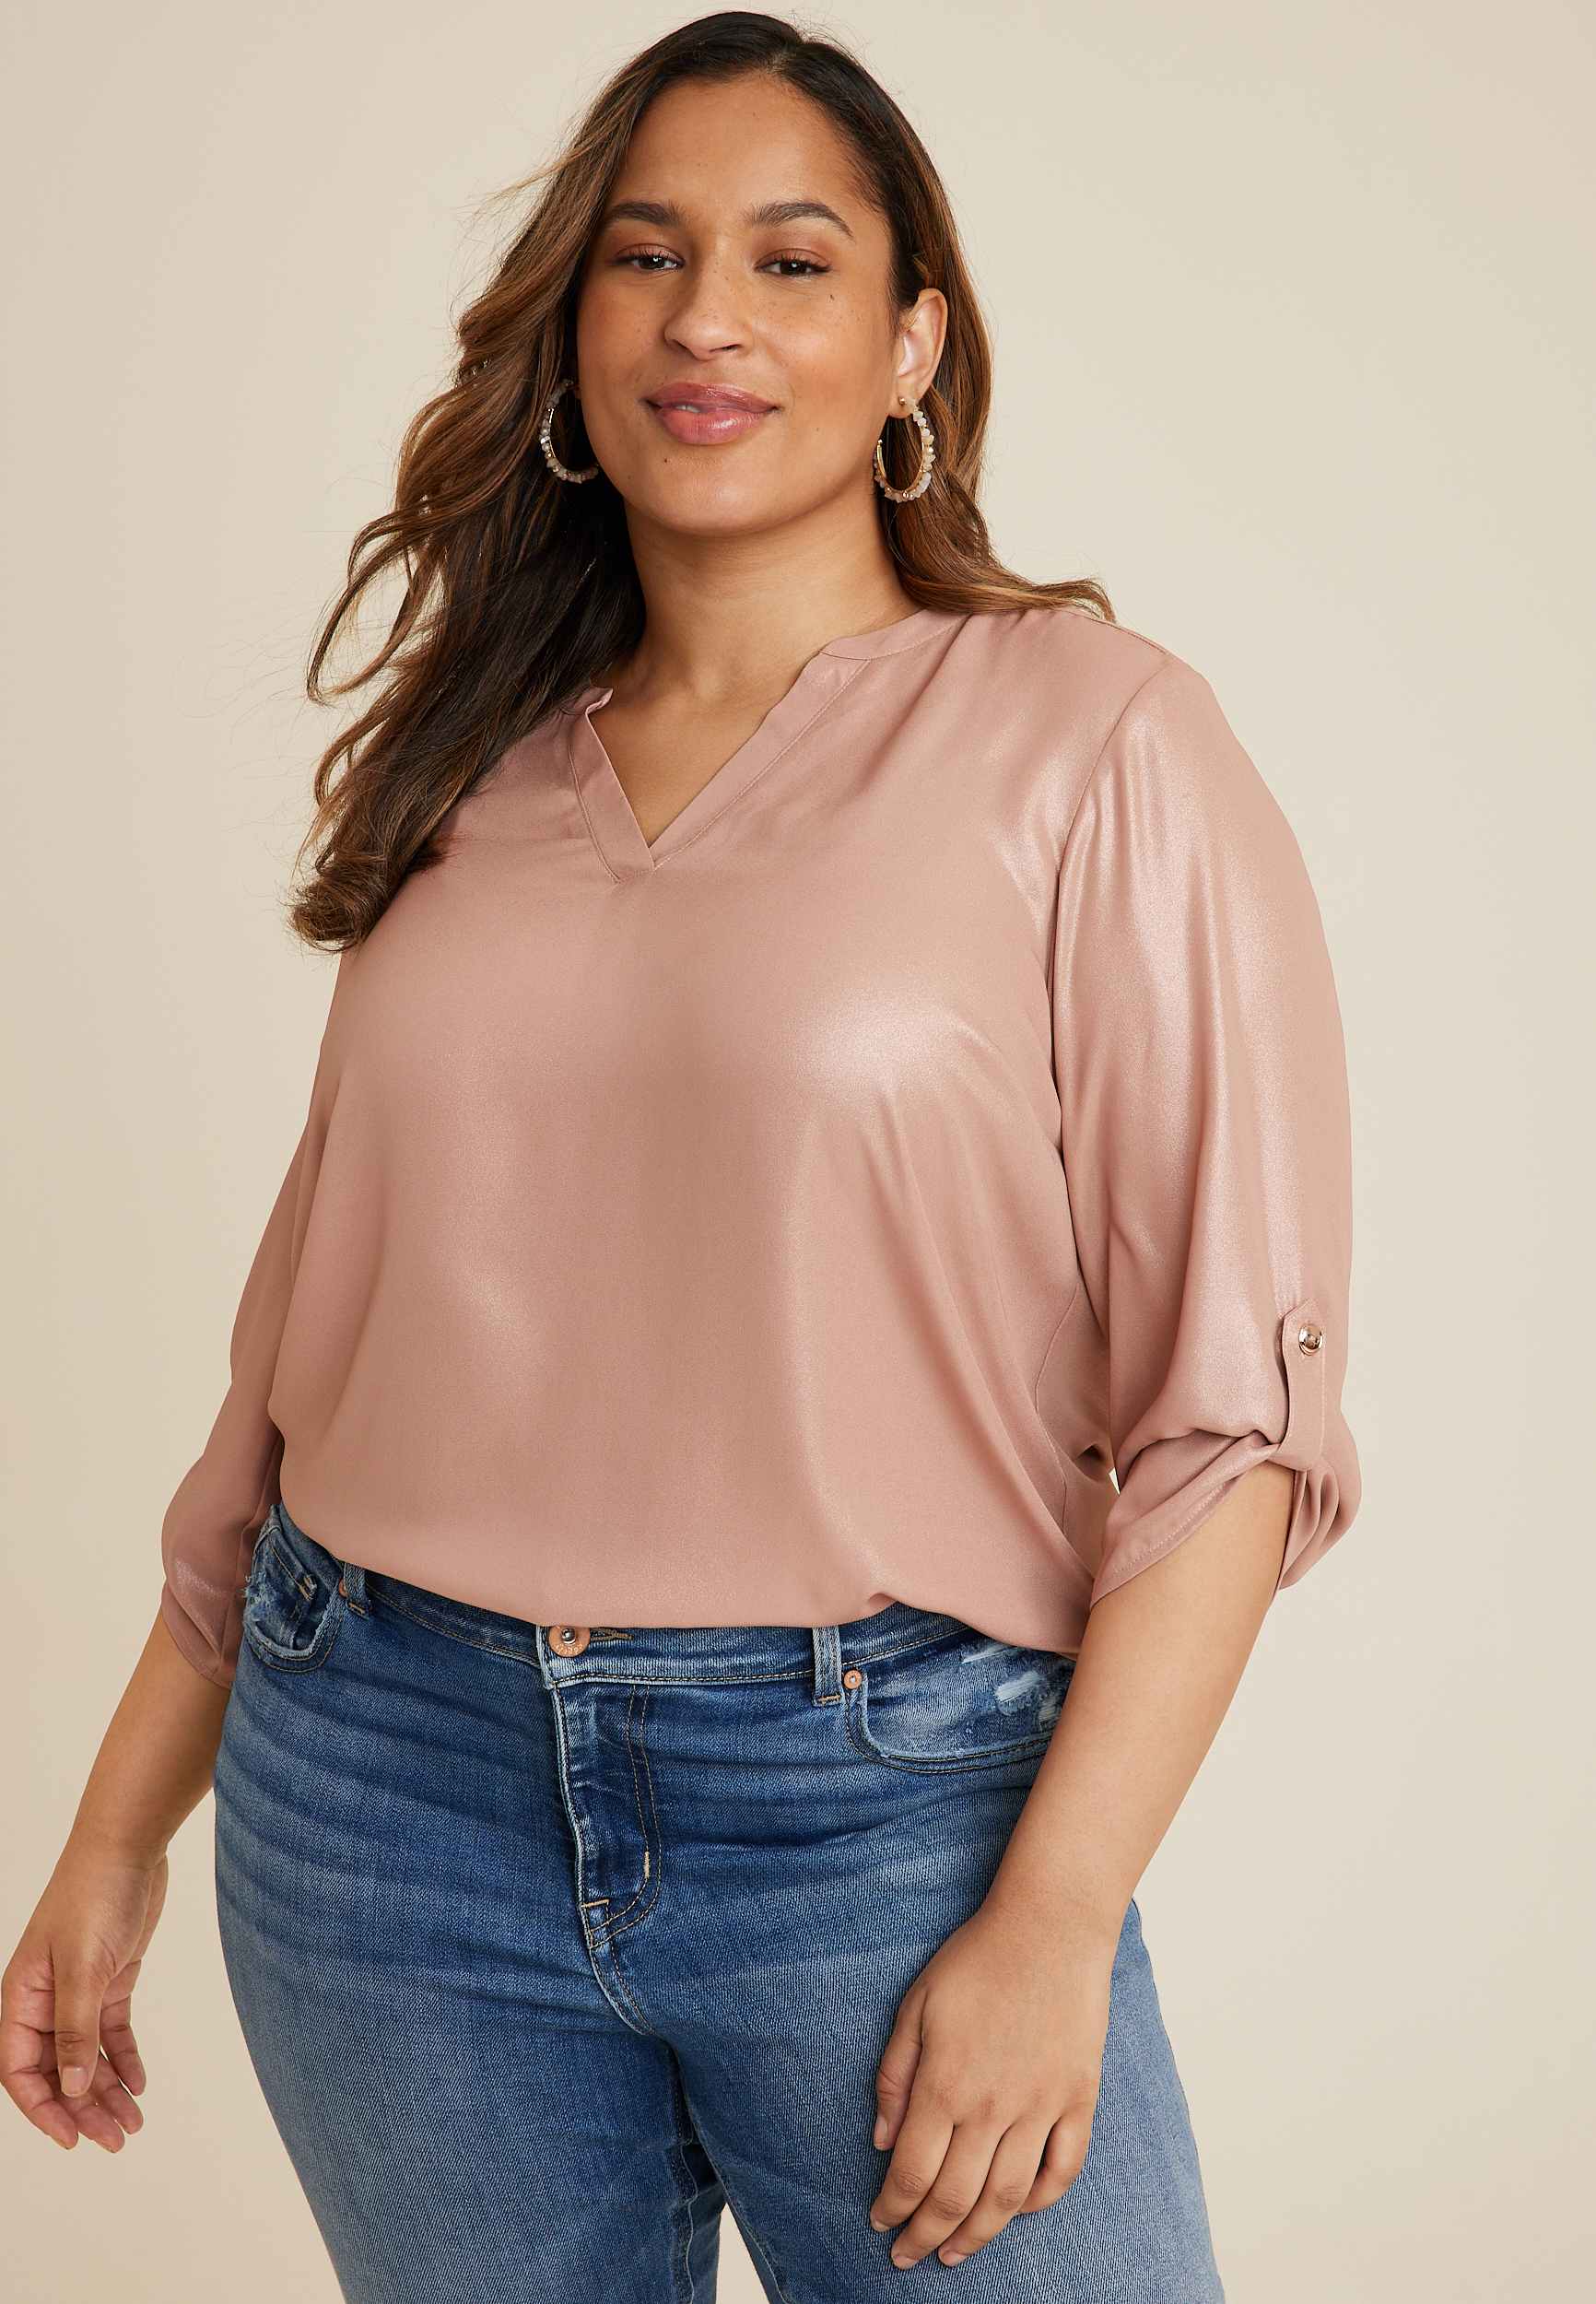 Women's V Neck Tee T,Sale Plus Size,Women Clothes Under 10 Dollars, Clothes, Women Blouses Clearance Under 10 Dollars,Todays Deals Warehouse  Deals,Today's Deals in Prime at  Women's Clothing store